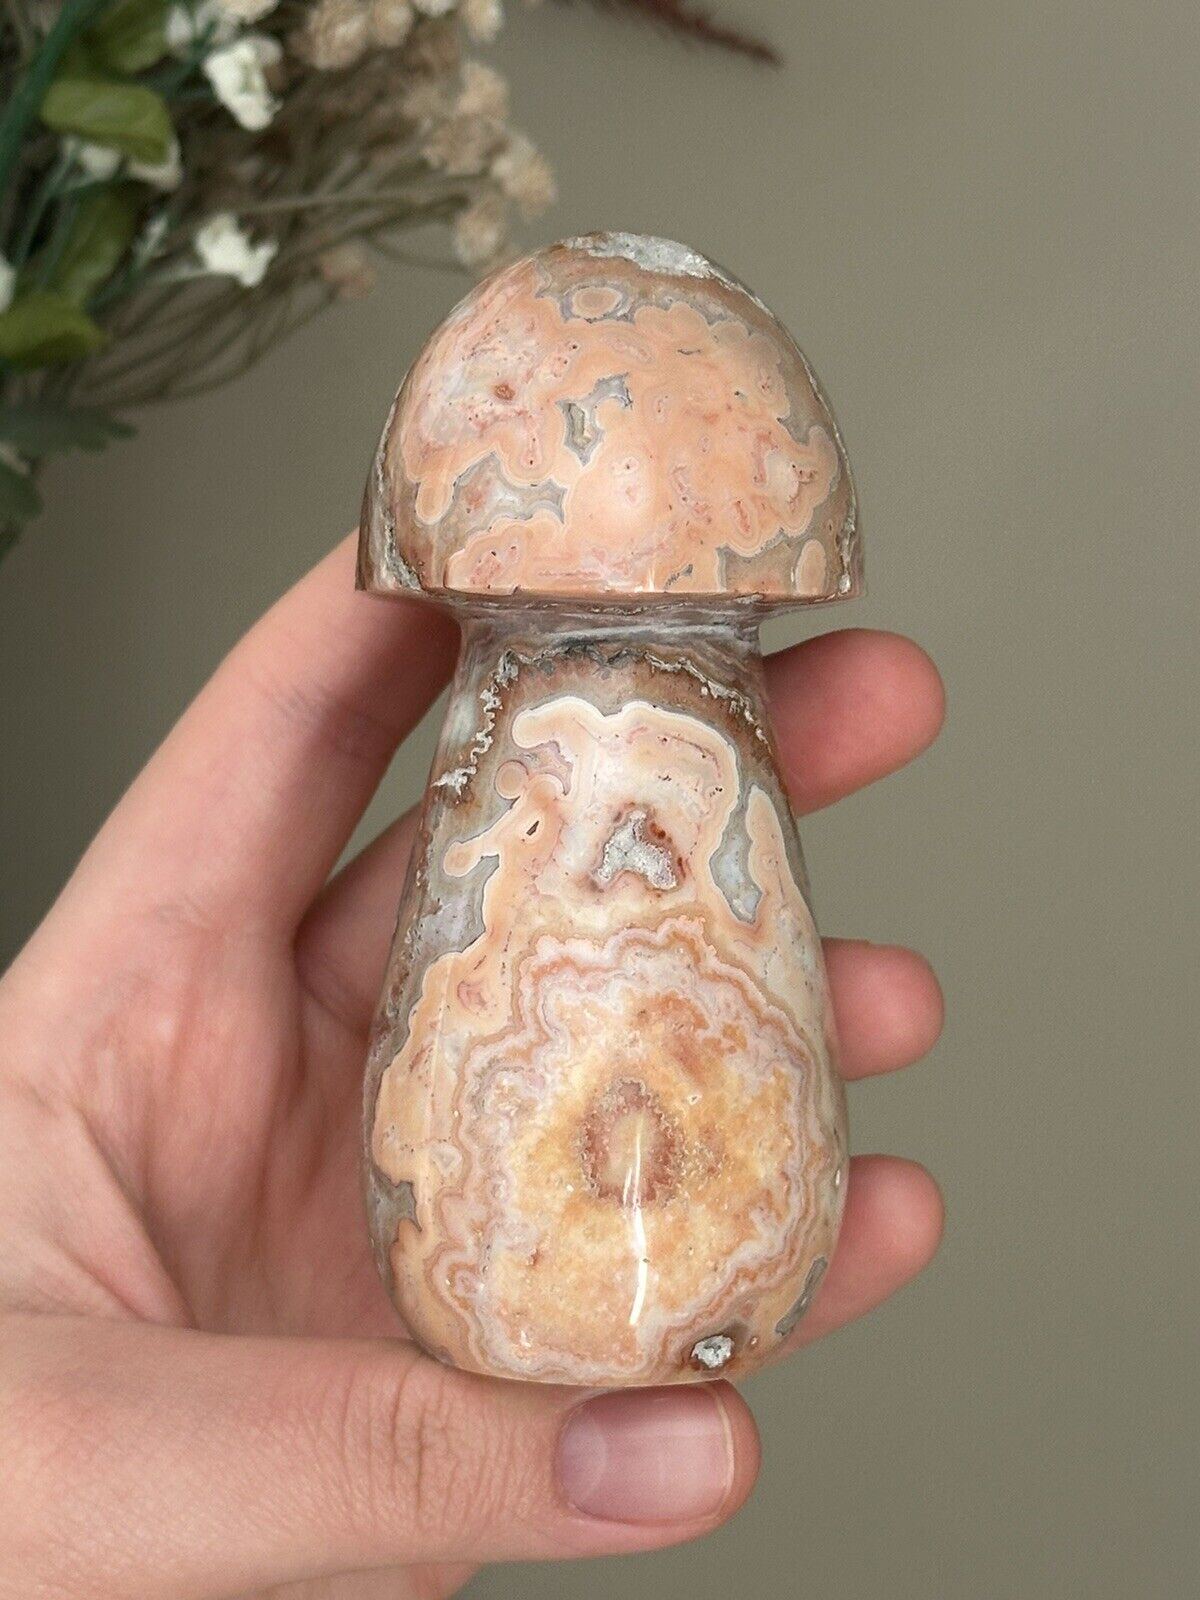 XL peachy indonesian crazy lace agate mushroom carving 🍑 polished crystal